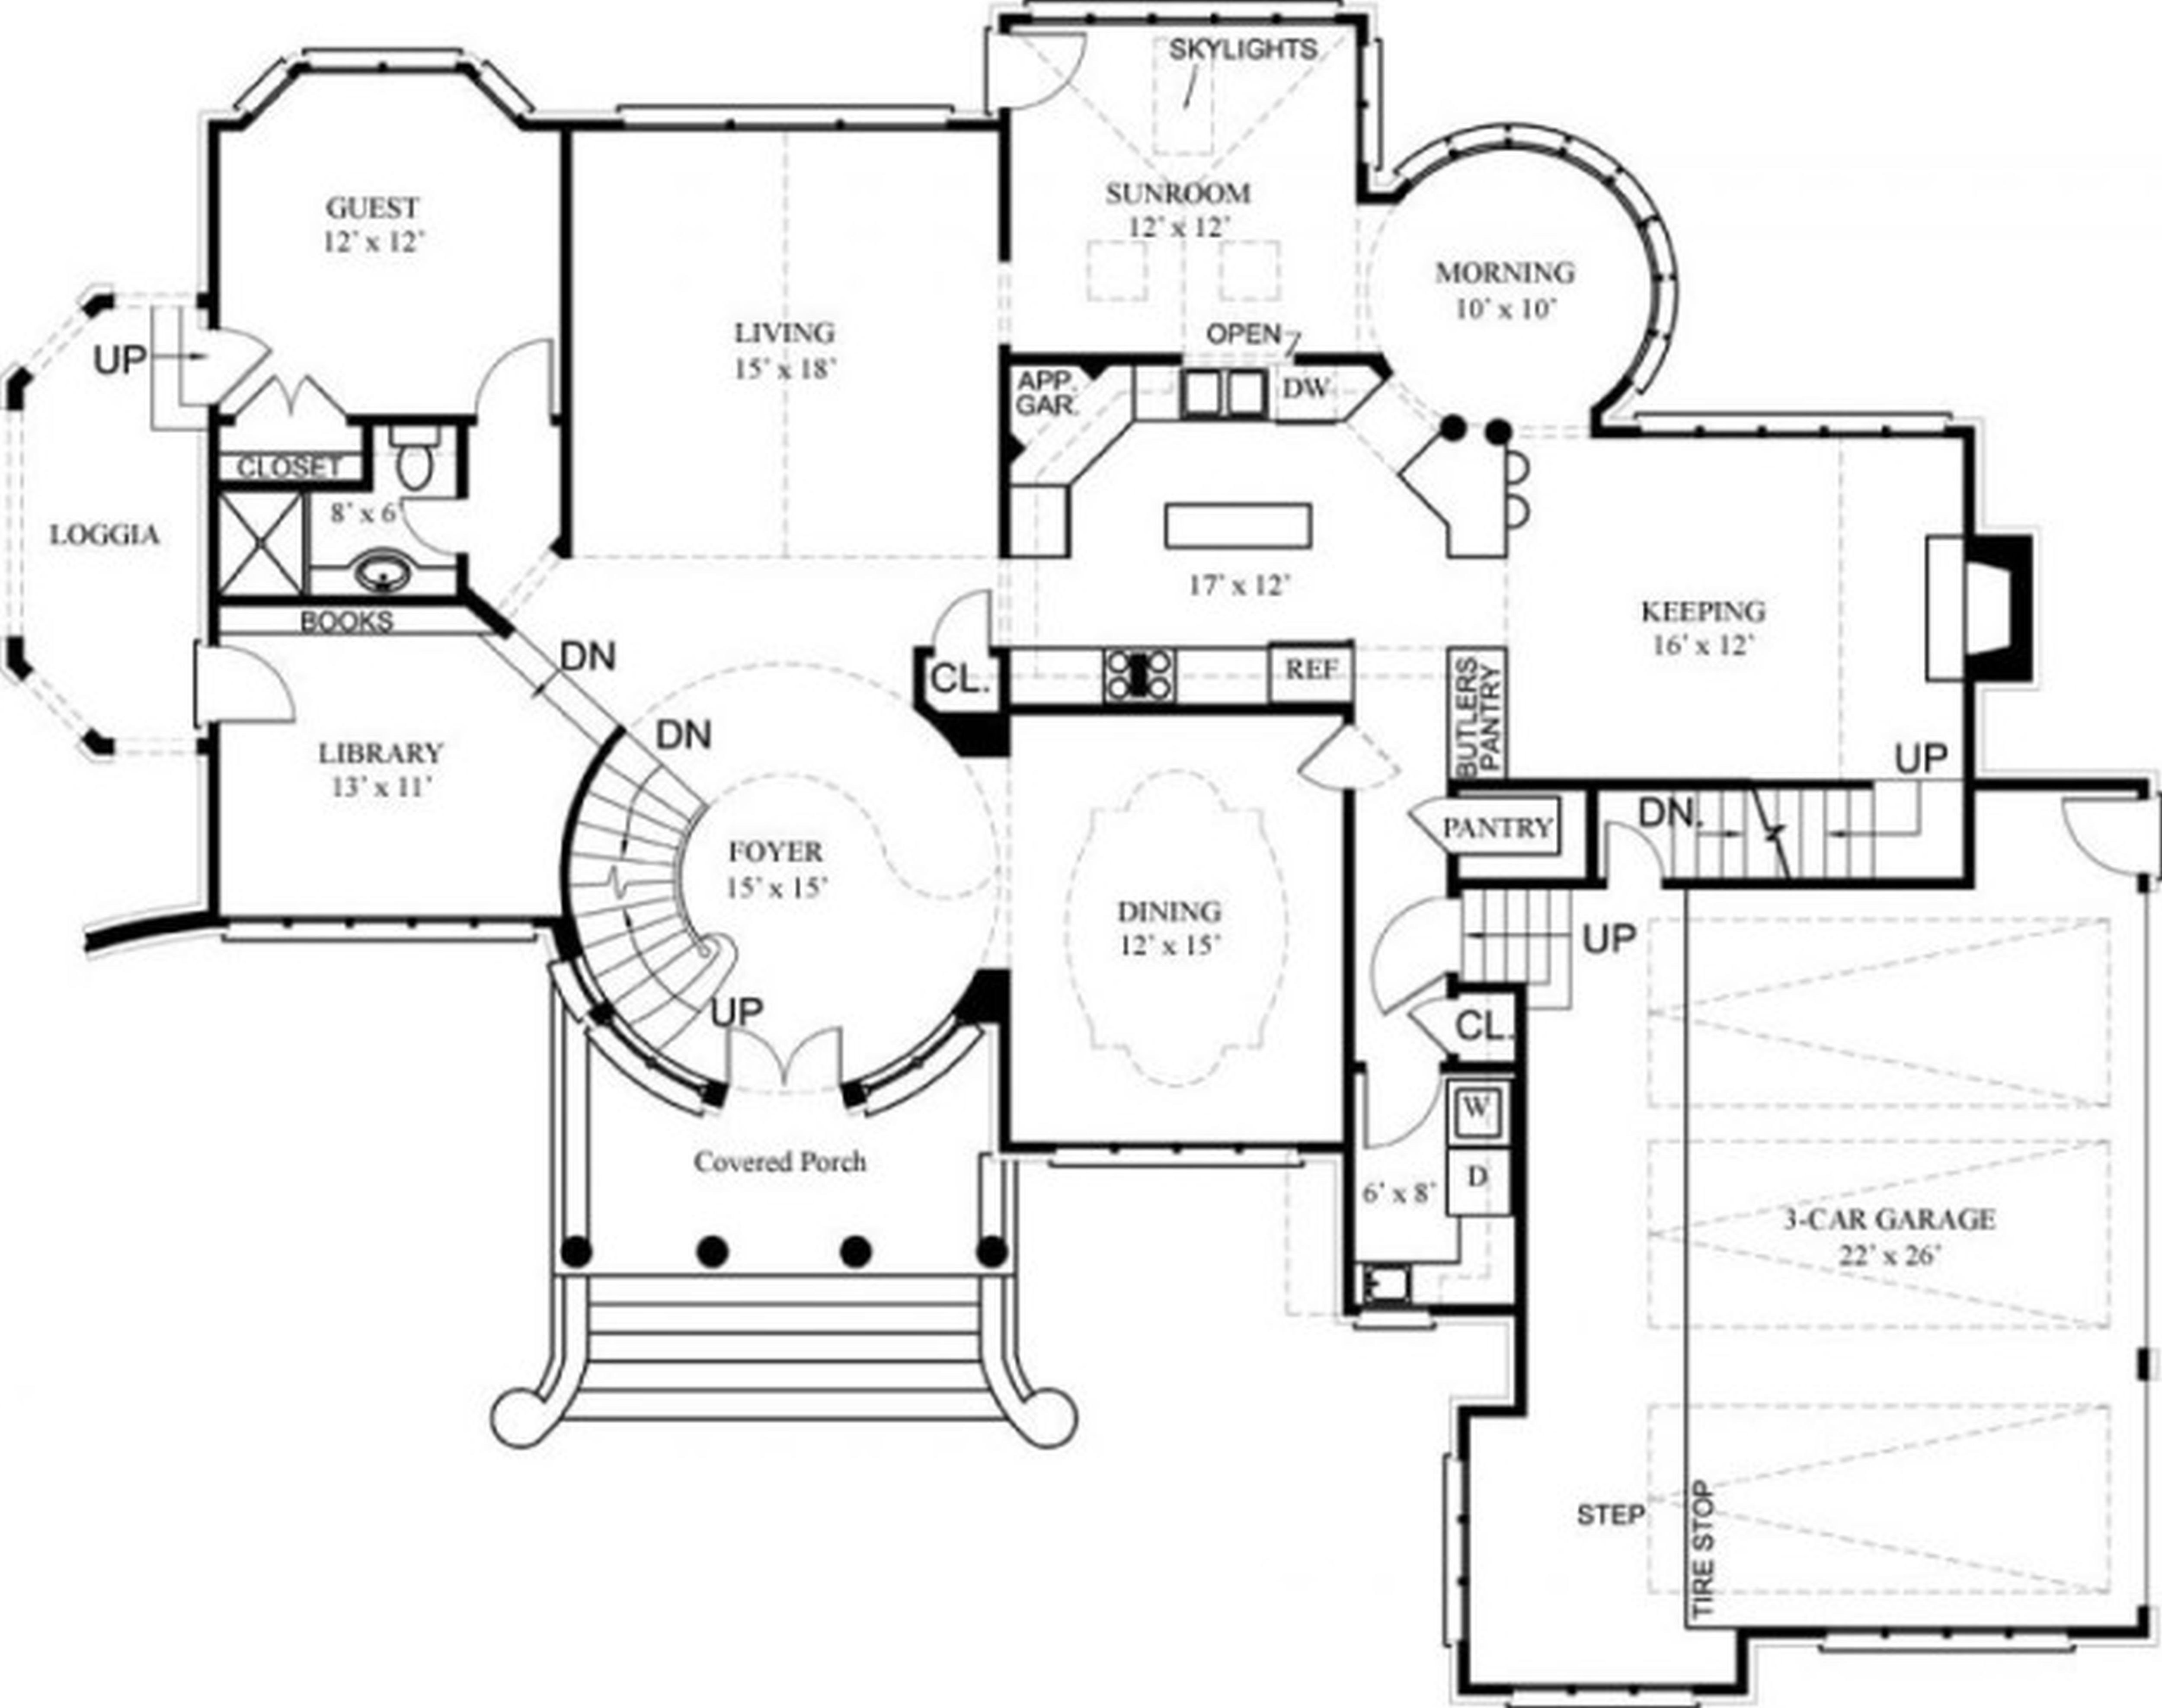 An 214 Luxury Free Small House Plans Awesome 2017 House Plans Elegant House Phone An